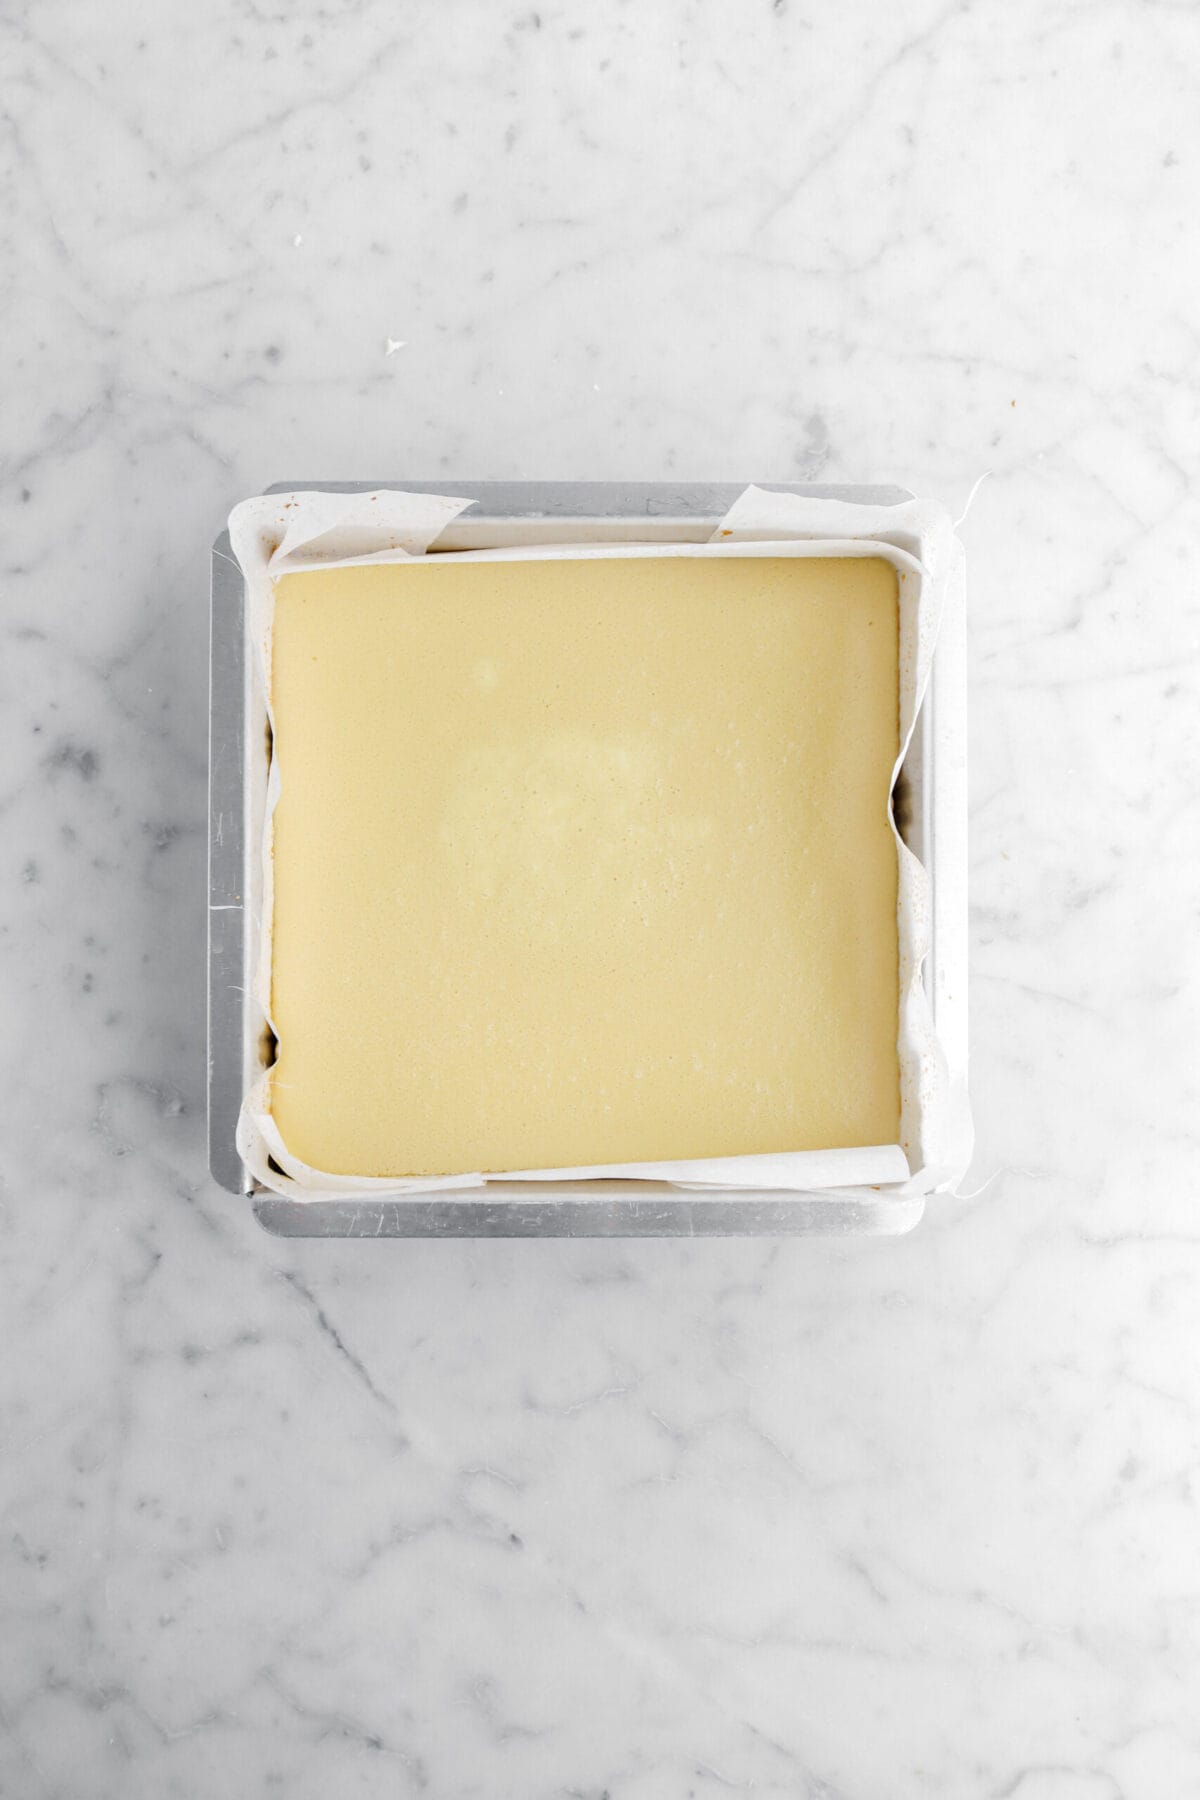 Par-baked maple cheesecake in lined square cake pan.